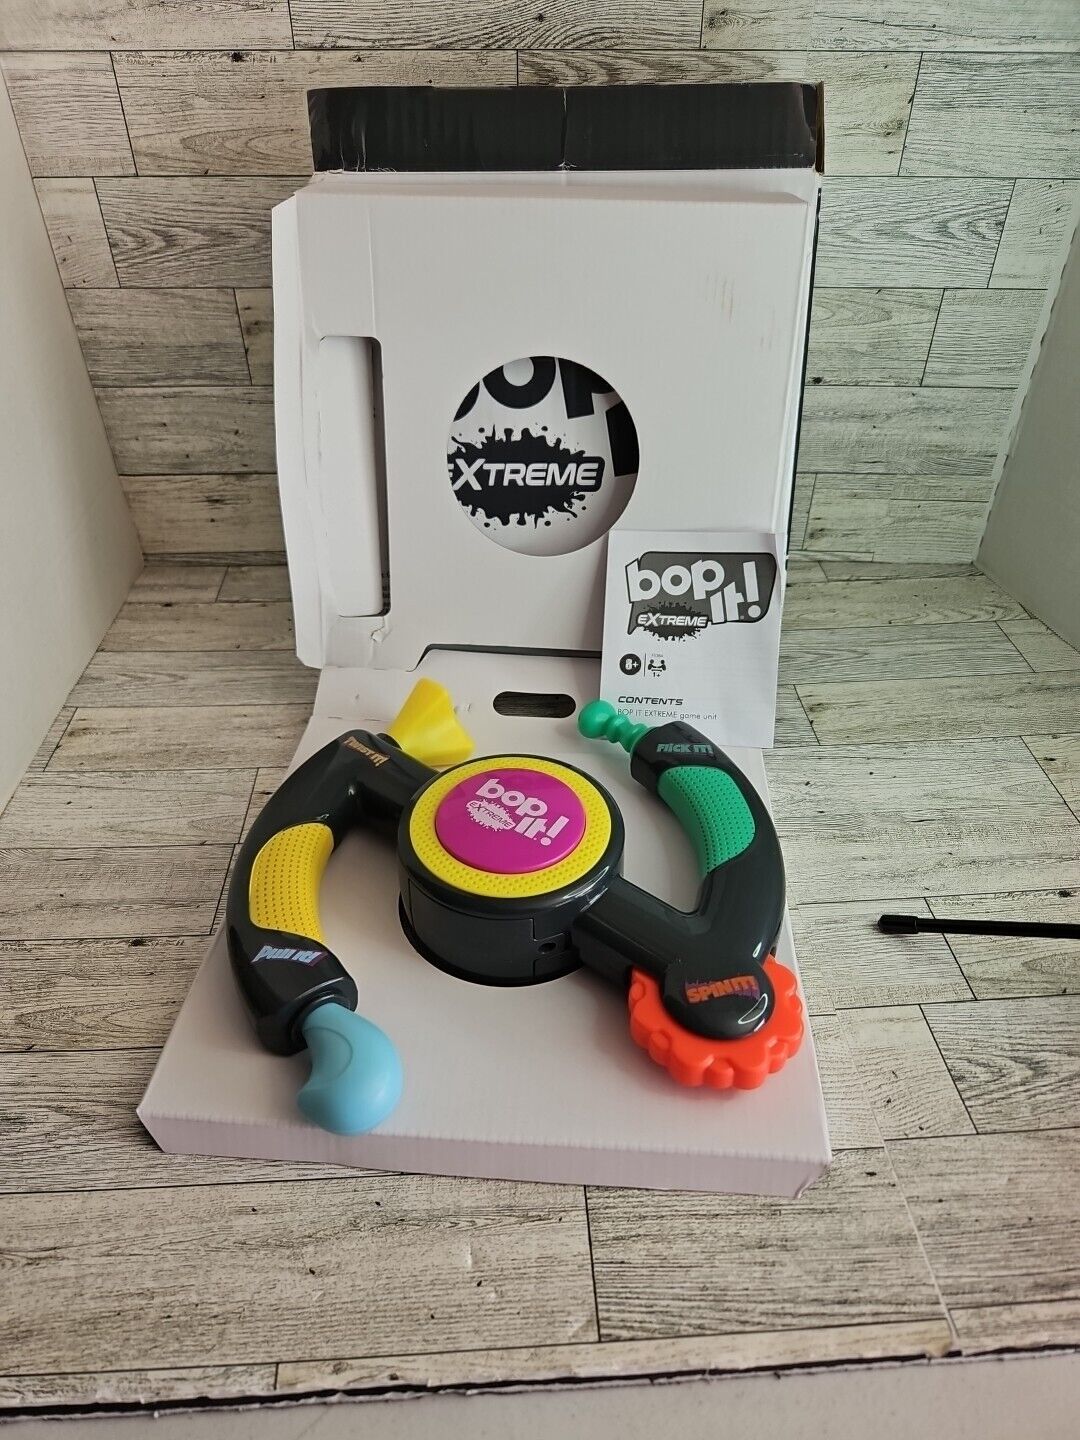 2022 Hasbro Gaming BOP IT Electronic Extreme Toy F5364 Tested And Working Does not apply Does Not Apply